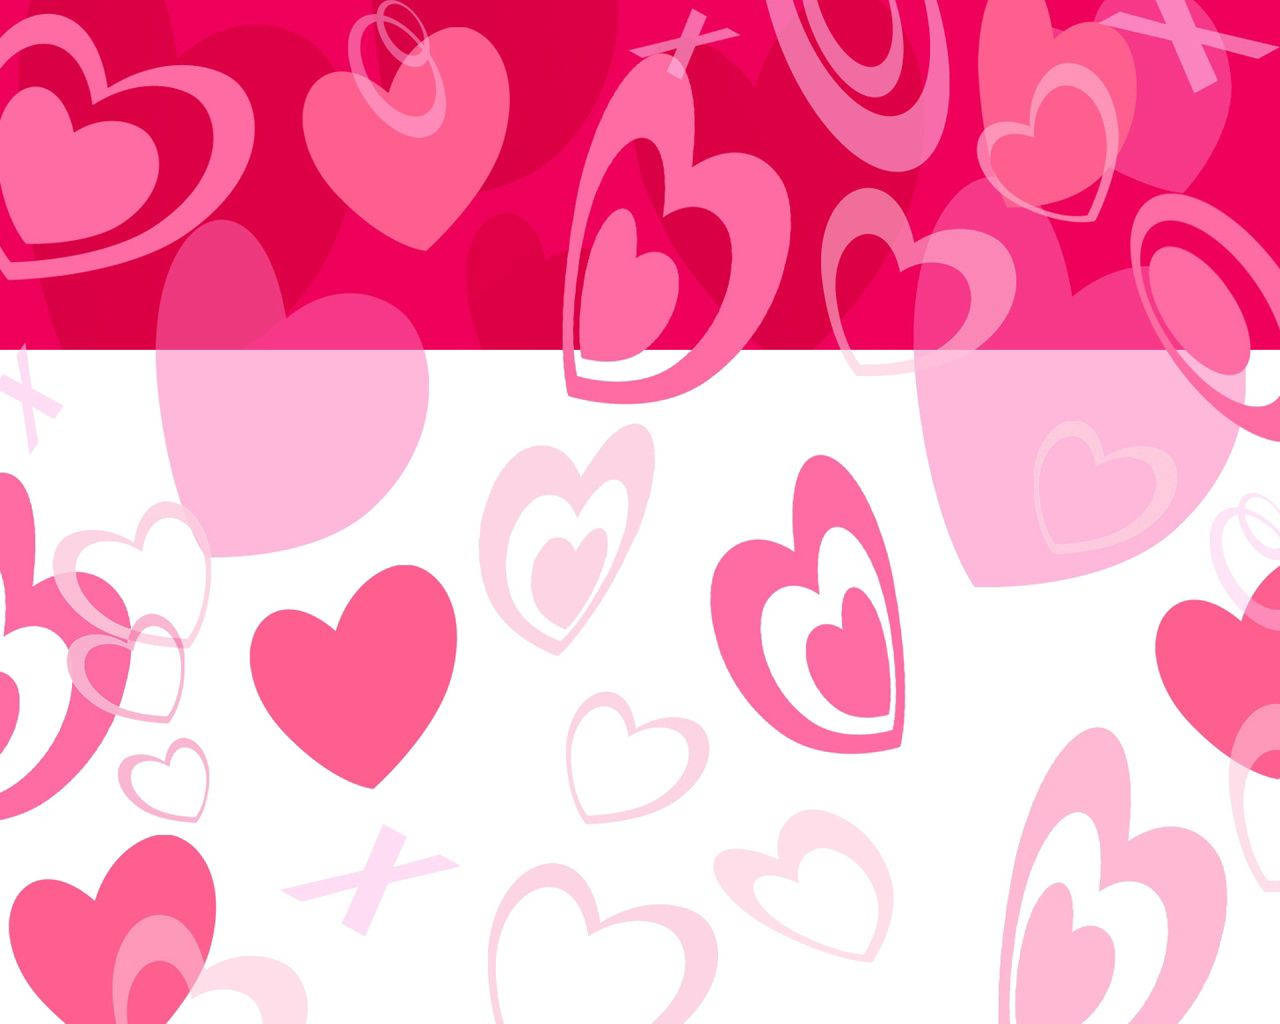 A bright, cheerful design of pink hearts. Wallpaper